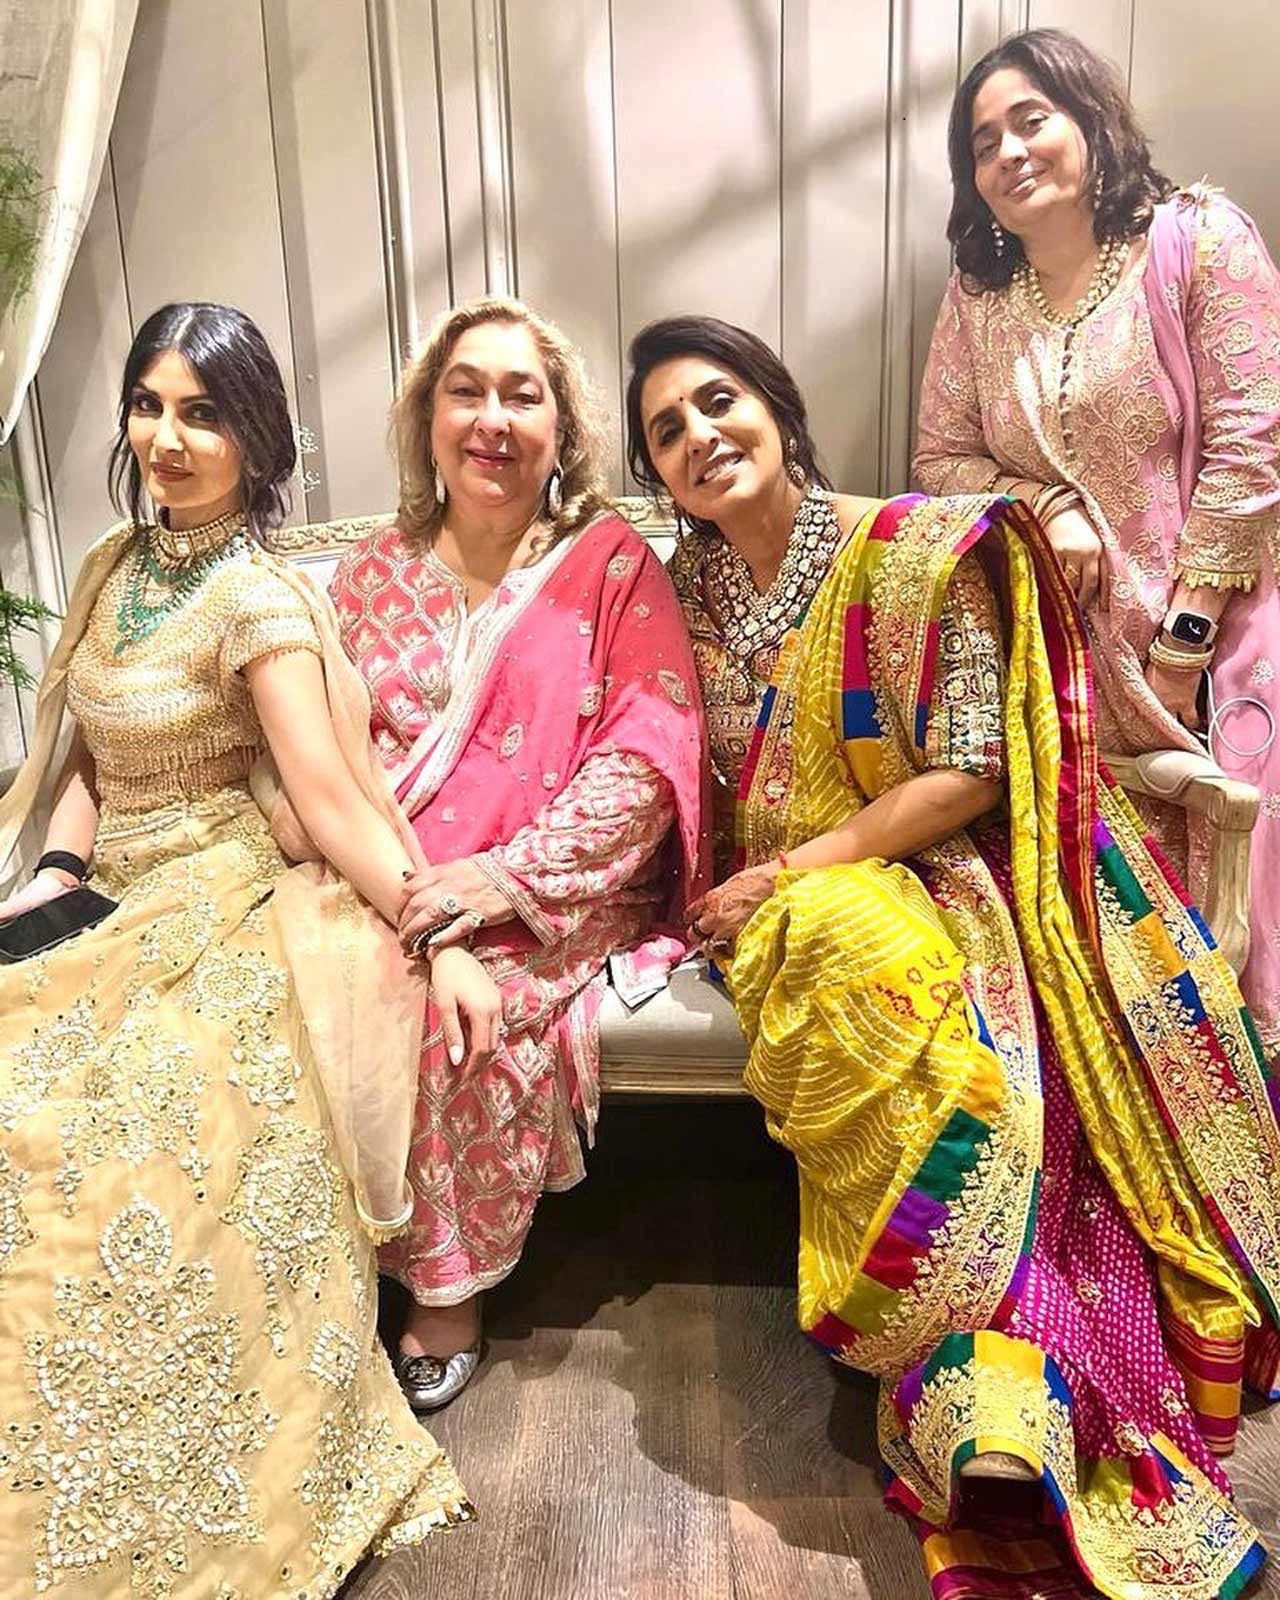 Neetu Kapoor chose a resham ghaghra from Abu Jani Sandeep Khosla's collection. The veteran star reportedly gave a special performance for the groom, 39 and the bride, 29.
In picture: Riddhima Kapoor Sahni with Rima Jain, Neetu Kapoor and Nitasha Nanda. The yesteryear actress shared the picture which read, 